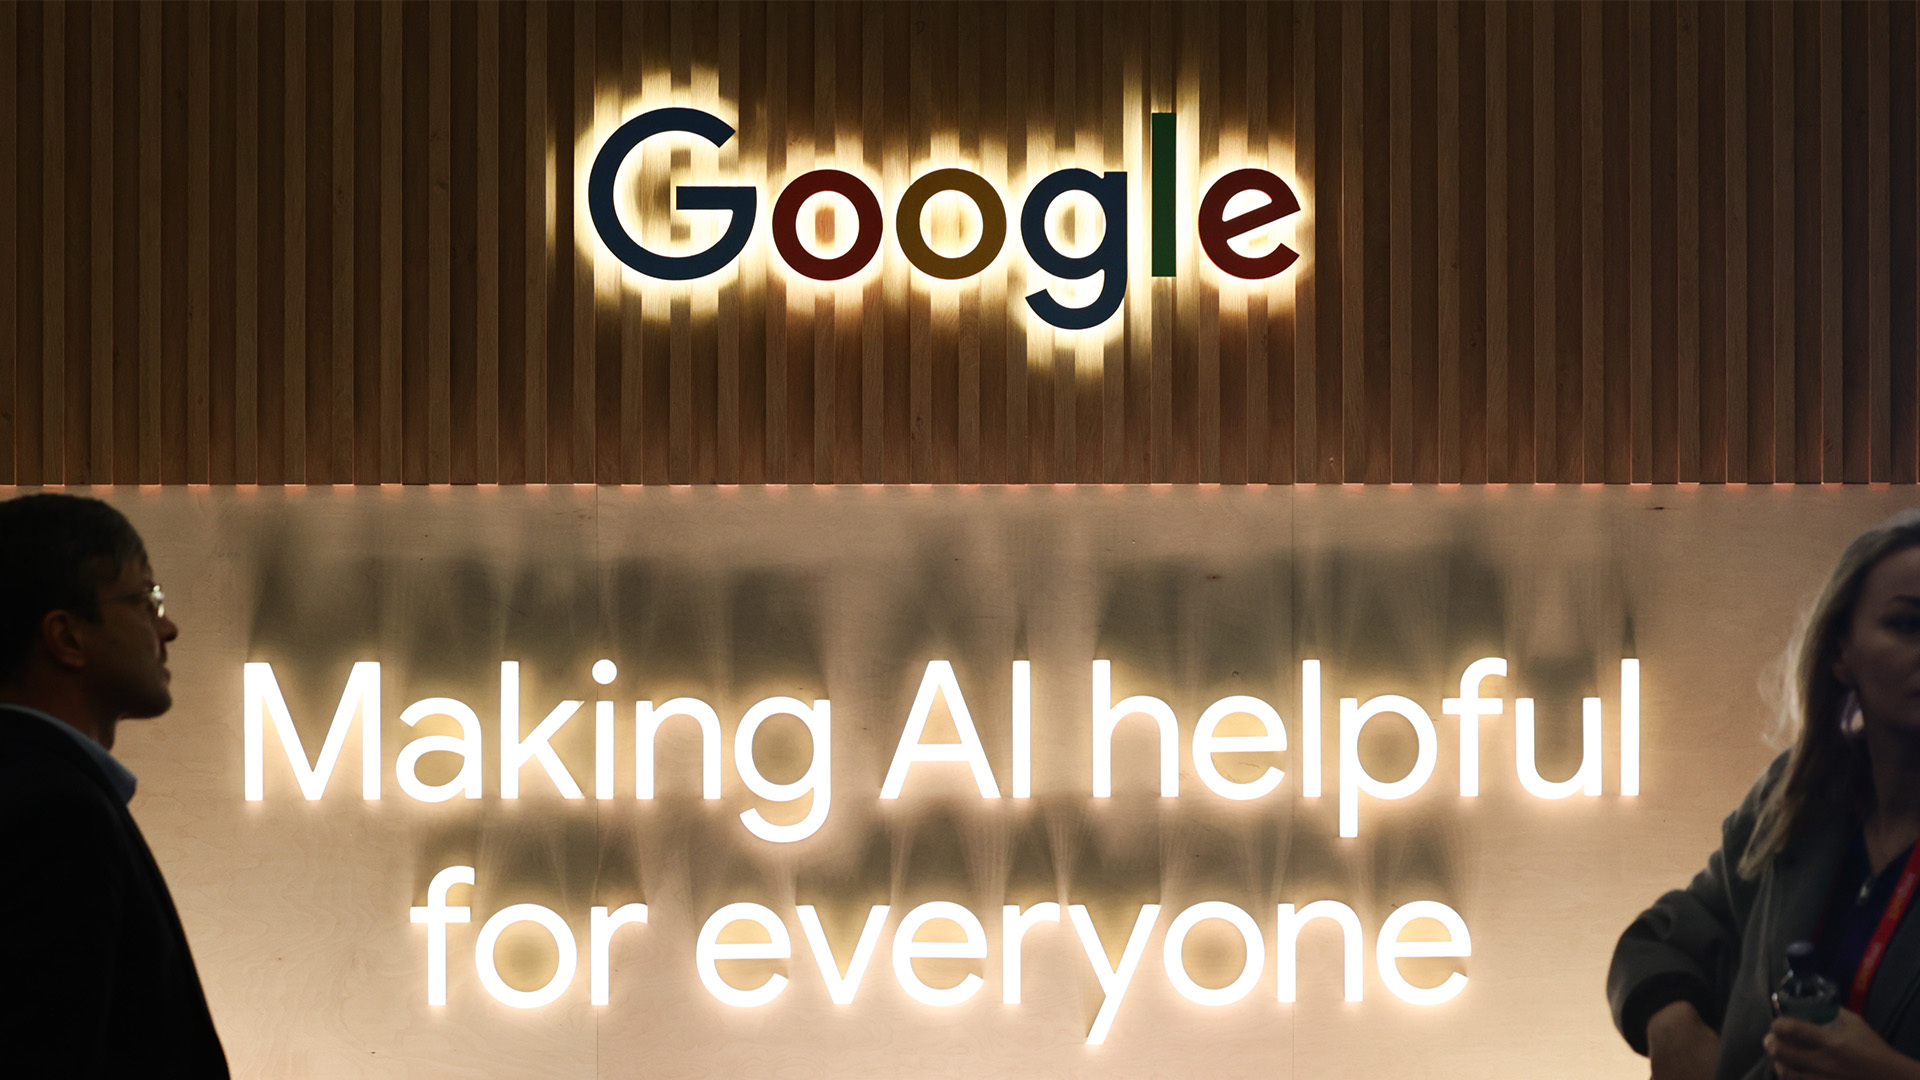 Google addressed AI search flaws and a global news outage as the company works to restore user trust and service reliability.